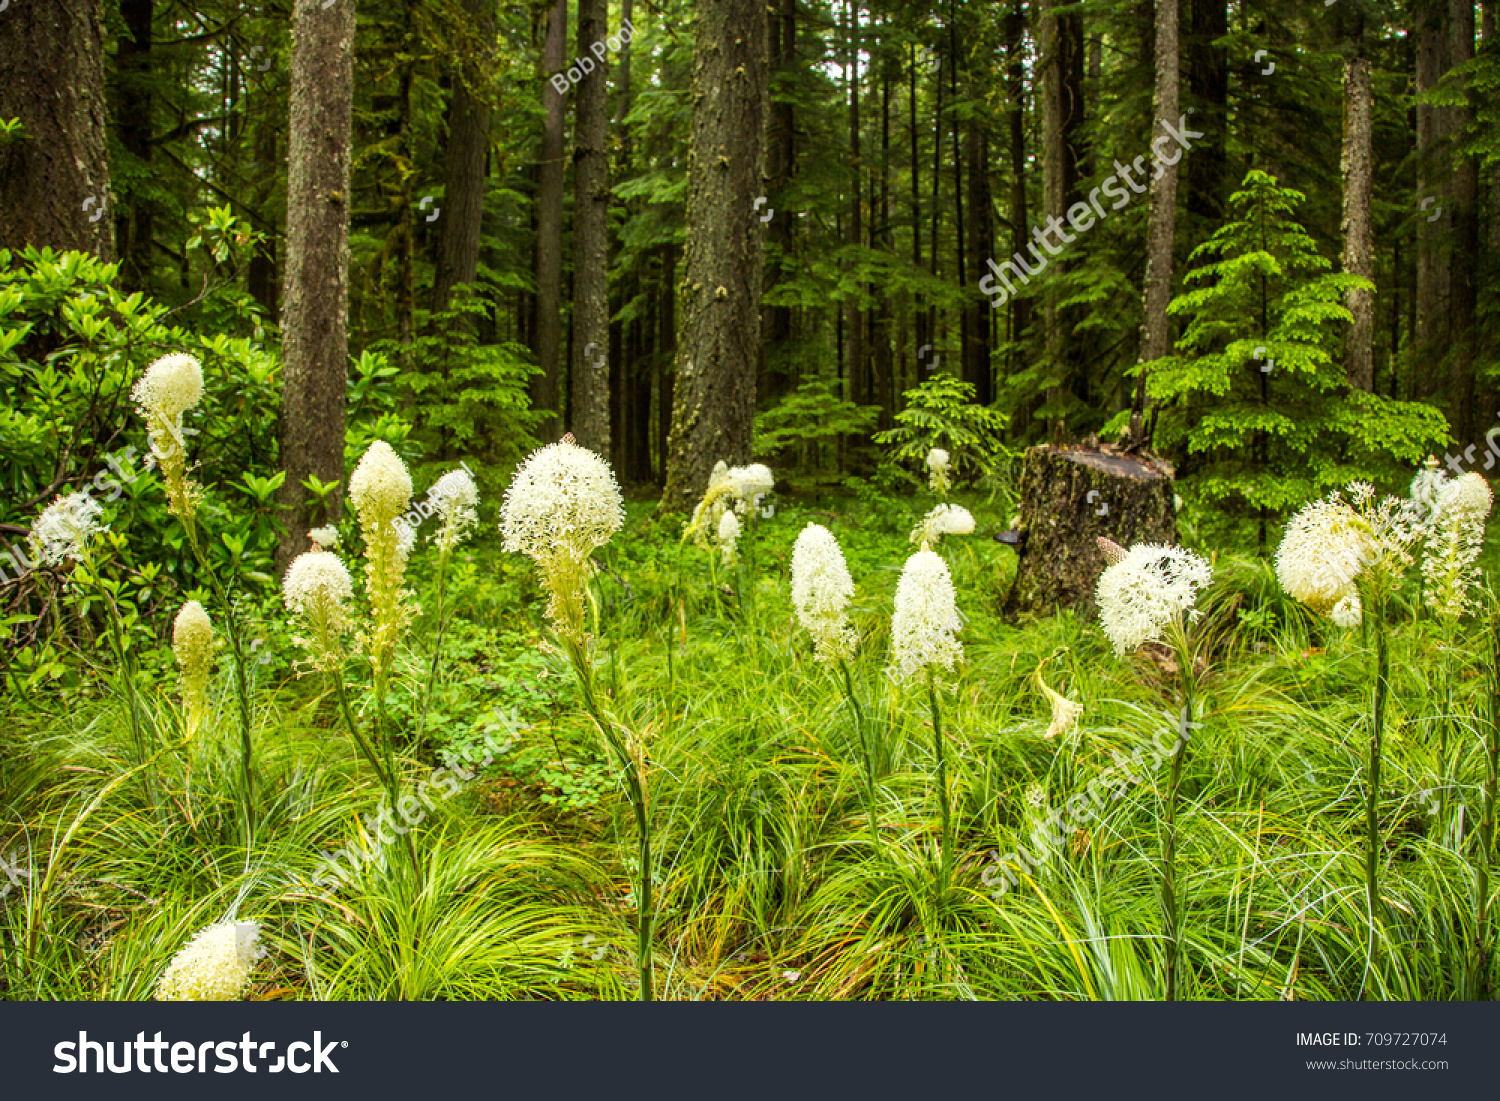 north american forest plants